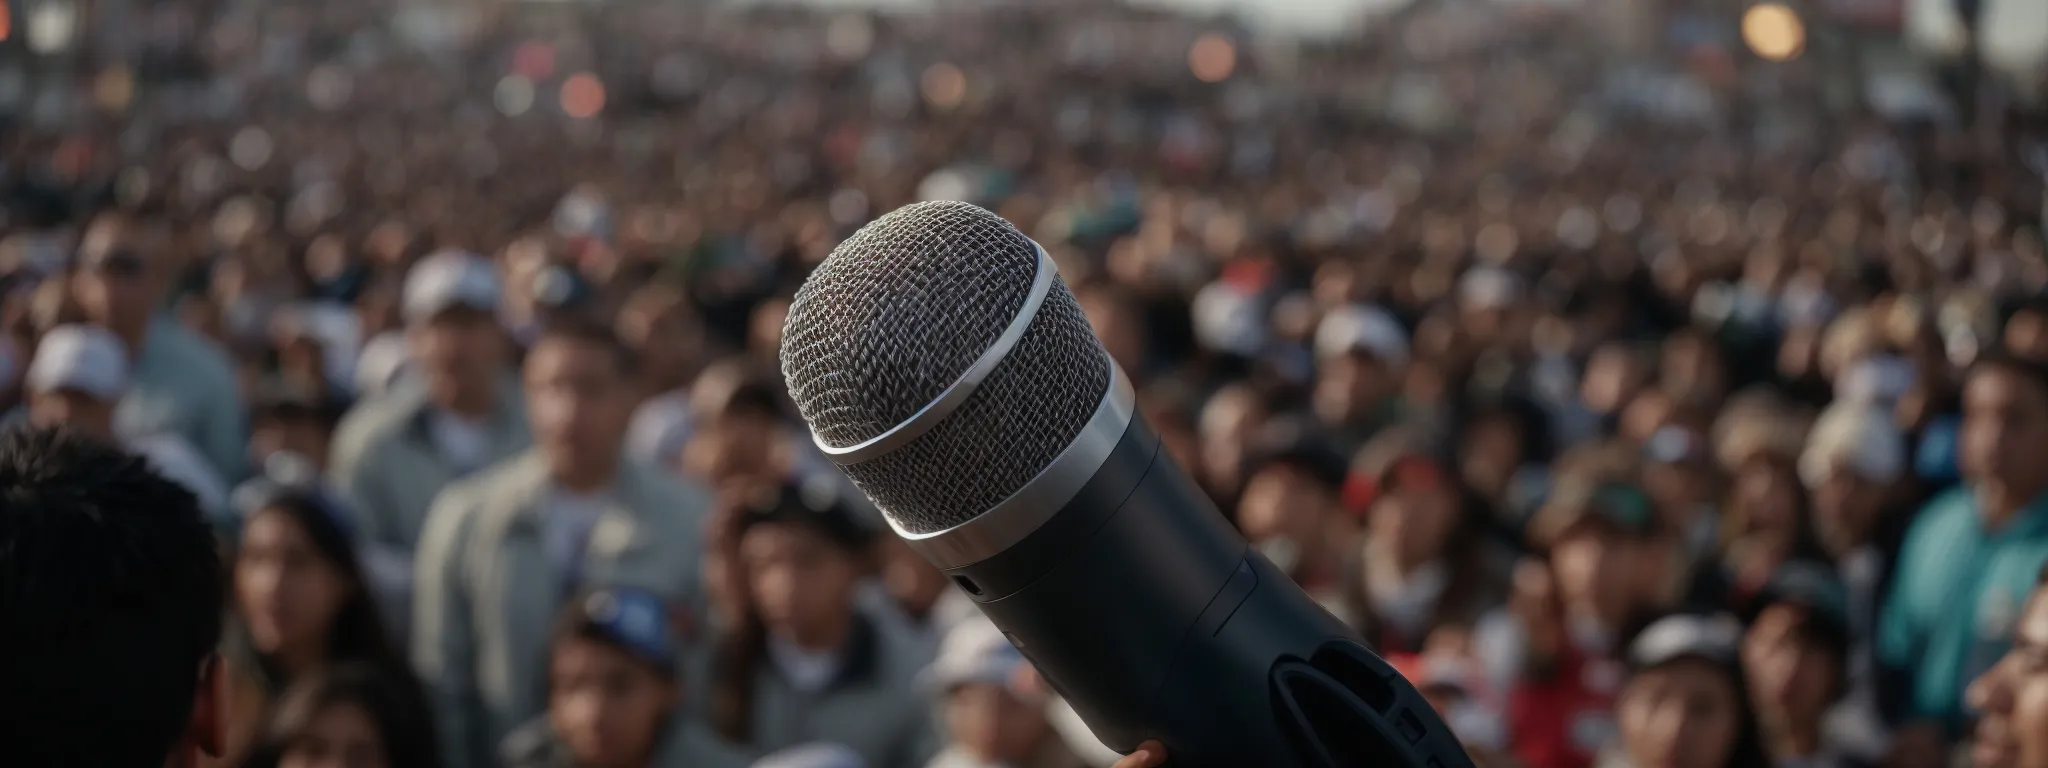 a close-up of a microphone against a backdrop of a crowd to represent a distinct brand voice engaging with new jersey consumers.